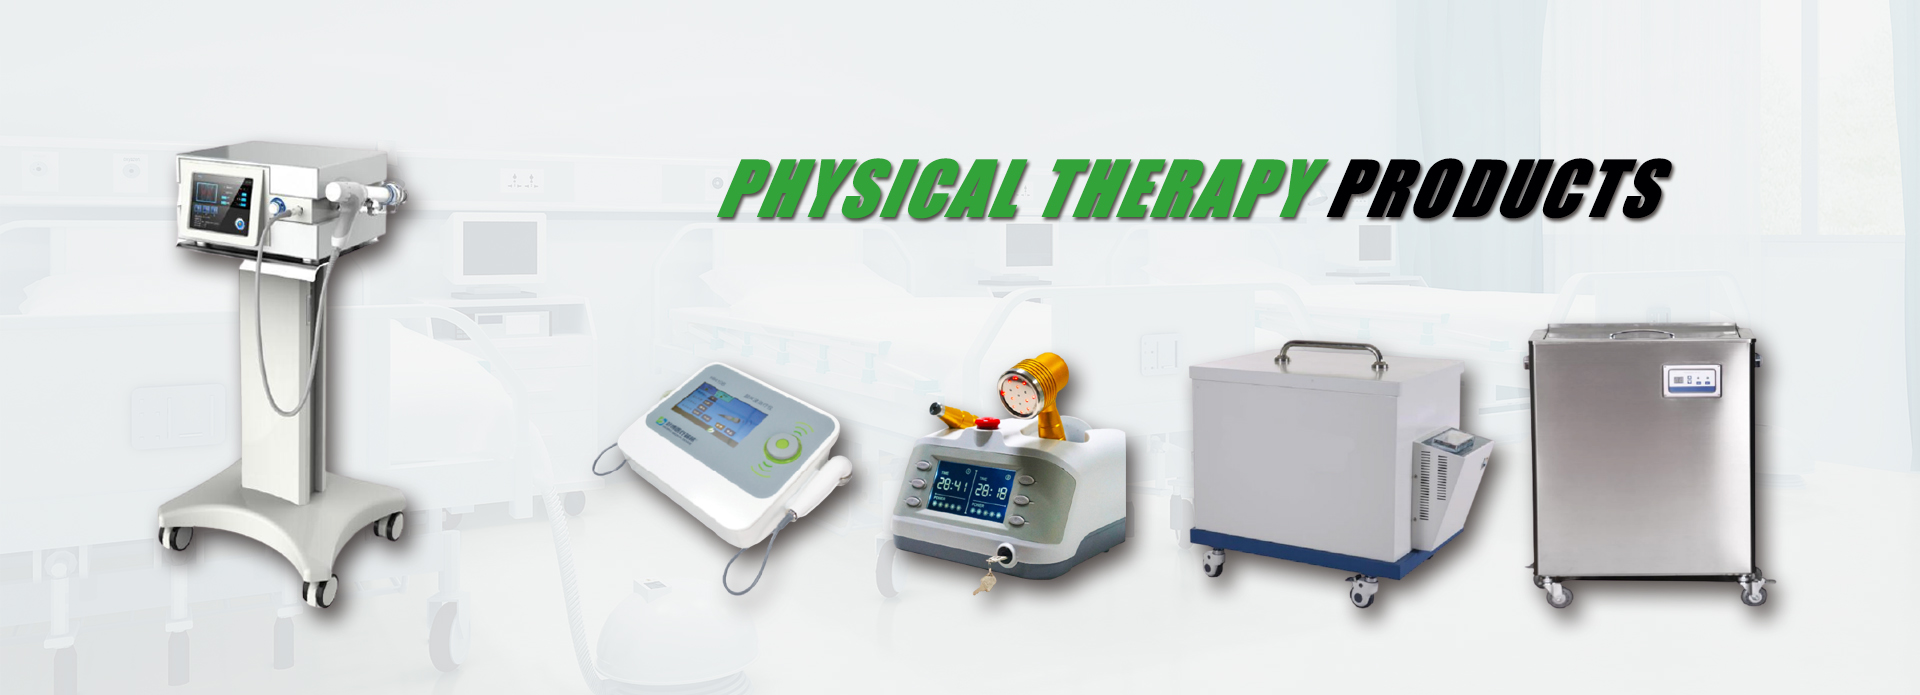 PHYSICAL THERAPY PRODUCTS1